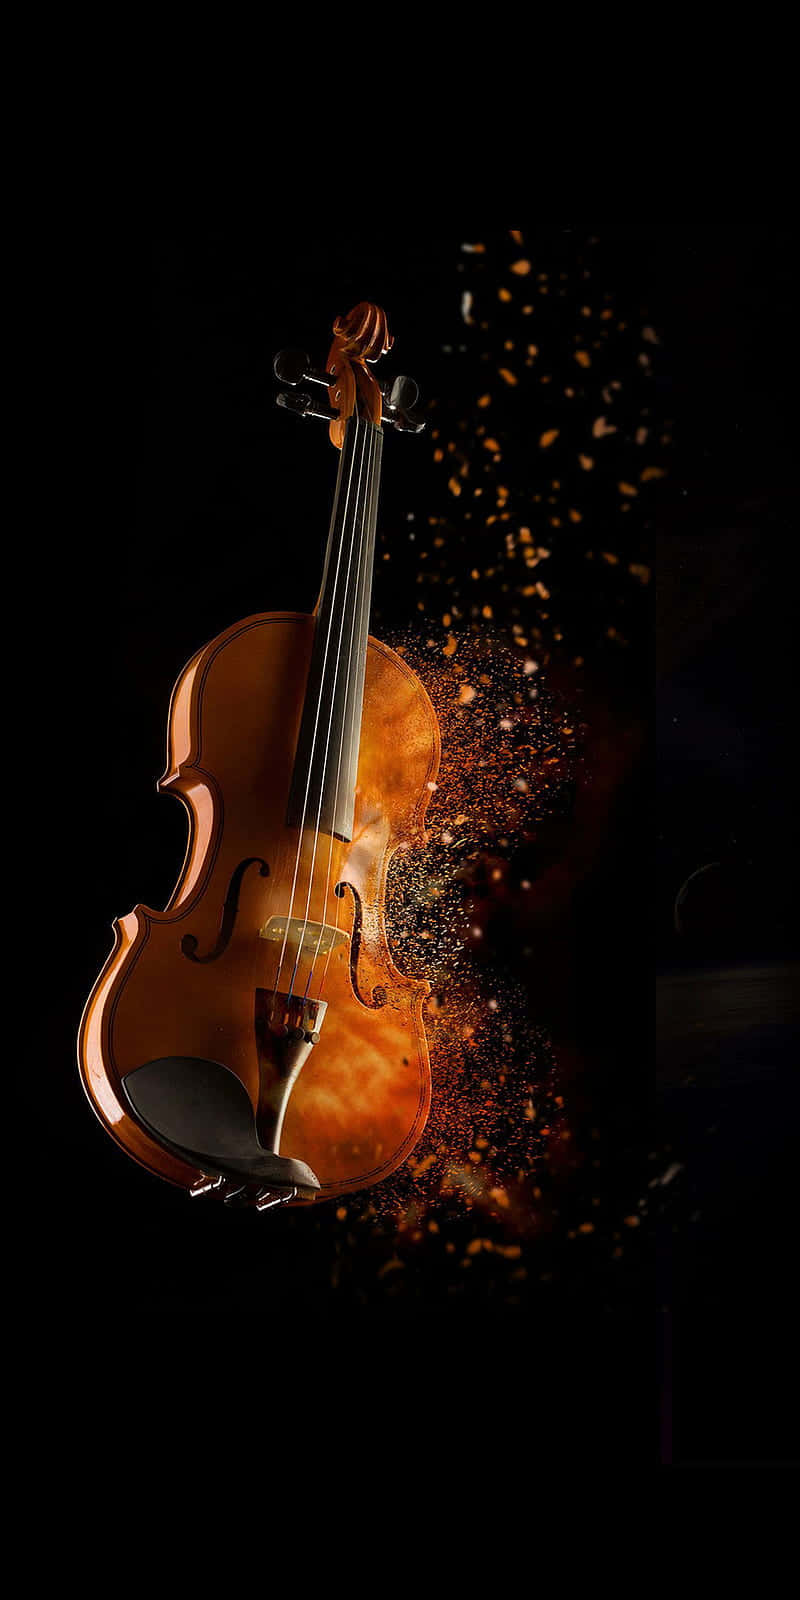 Musical Instrument Violin With Dust Picture